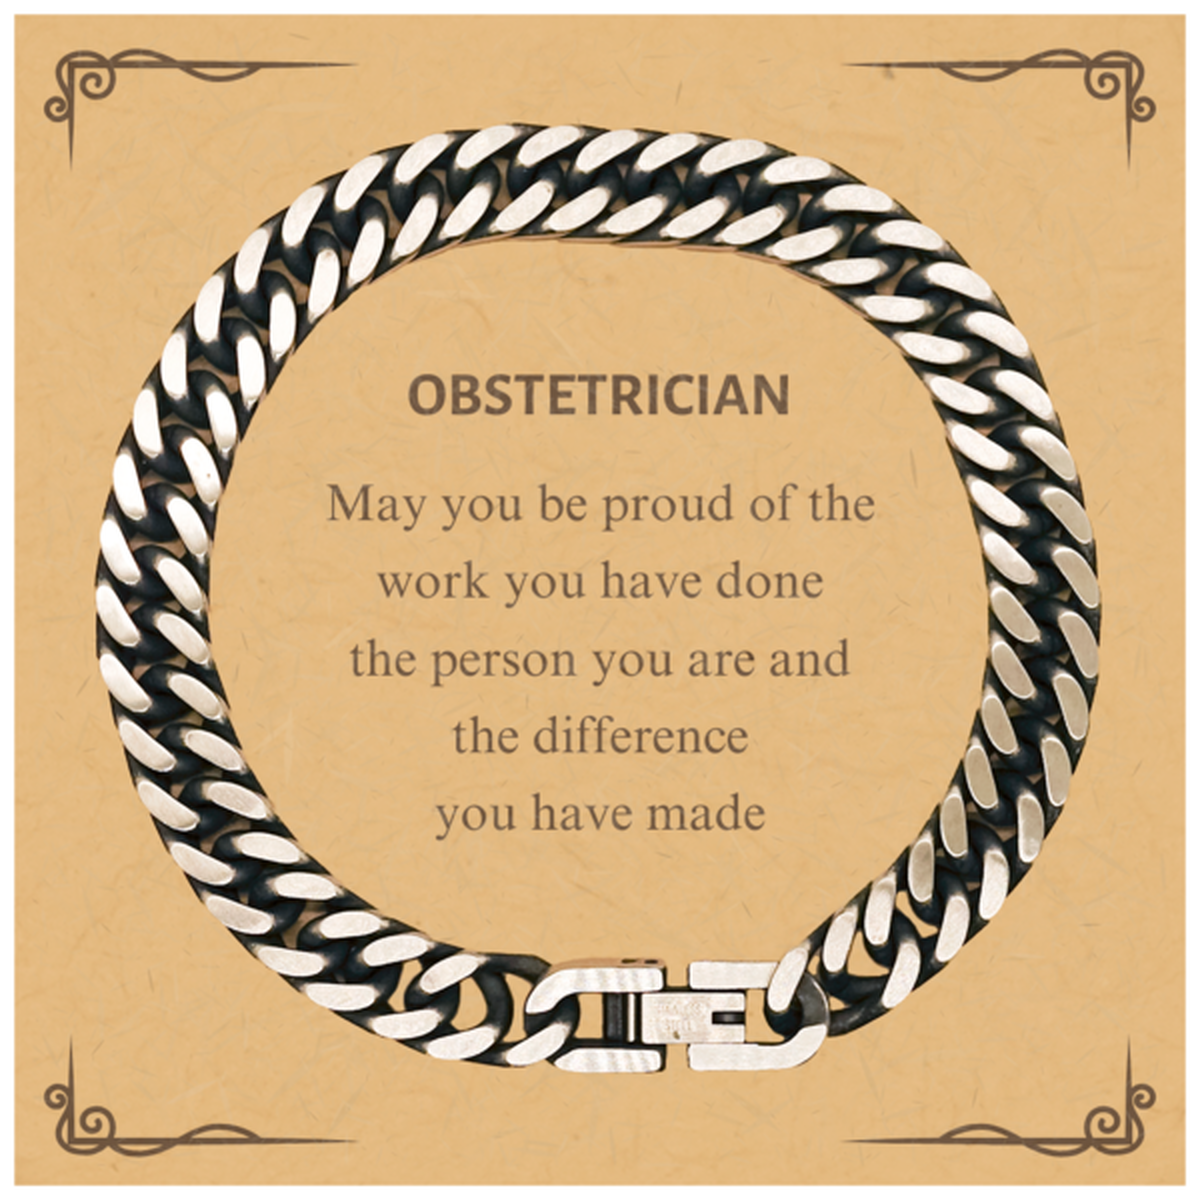 Obstetrician May you be proud of the work you have done, Retirement Obstetrician Cuban Link Chain Bracelet for Colleague Appreciation Gifts Amazing for Obstetrician